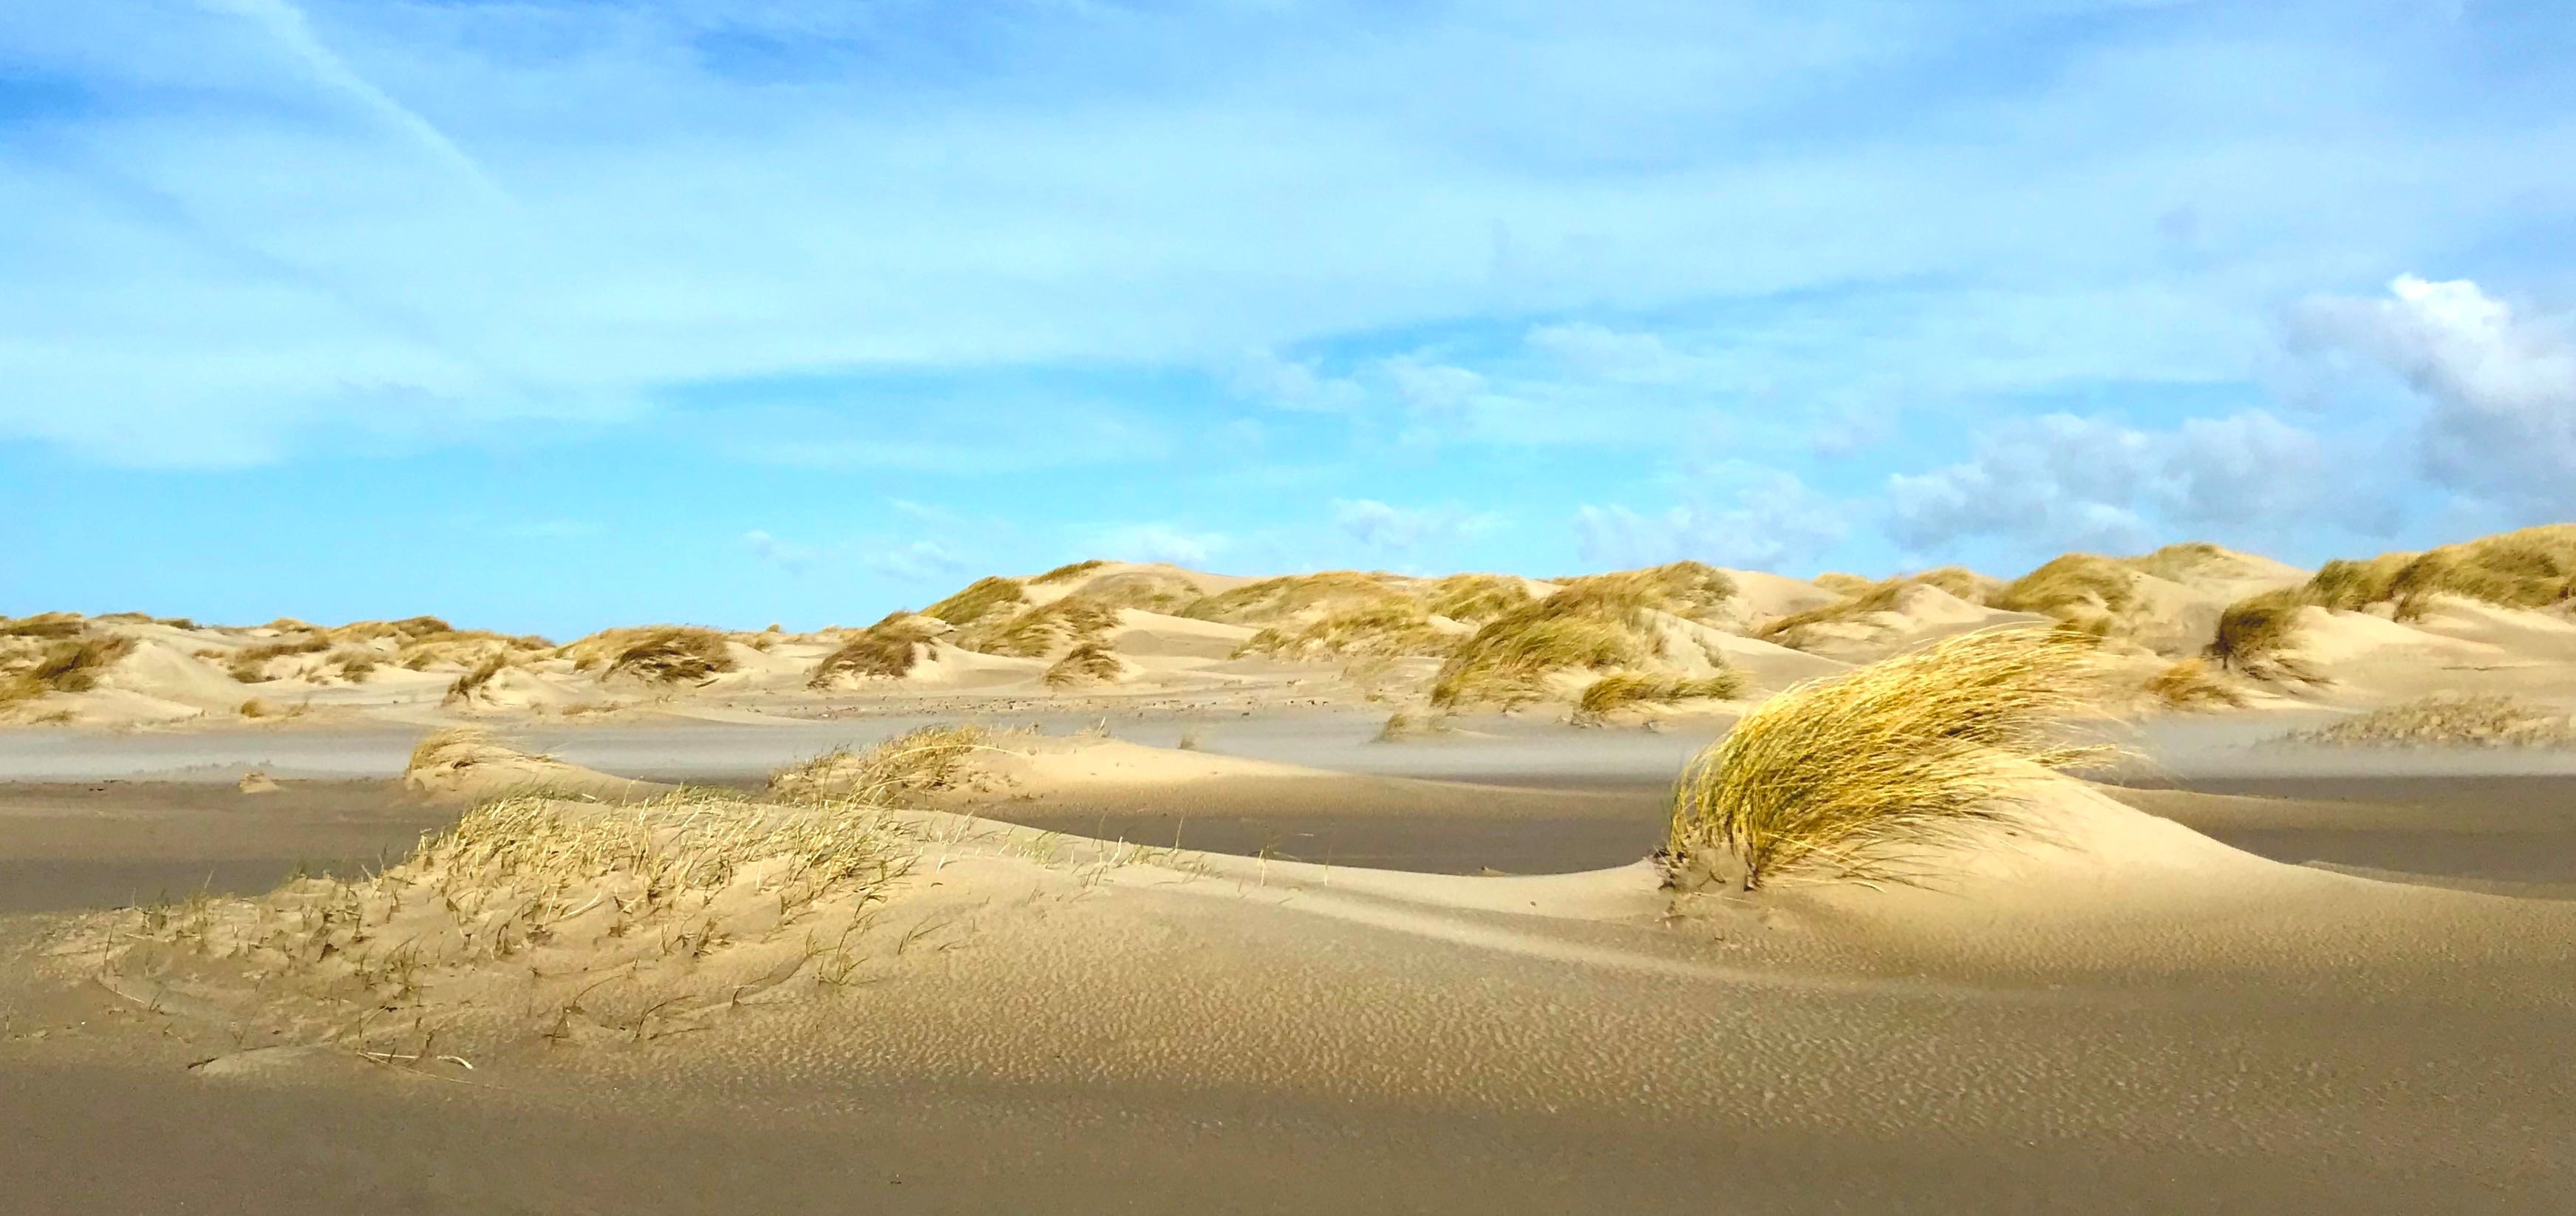 Sand couch (left) uses dispersed growth patterns to build low, wide dunes. Marram grass (right) catches more sand immediately around it, resulting in a higher dune. Location: De Hors, Texel. Credits: Valérie Reijers